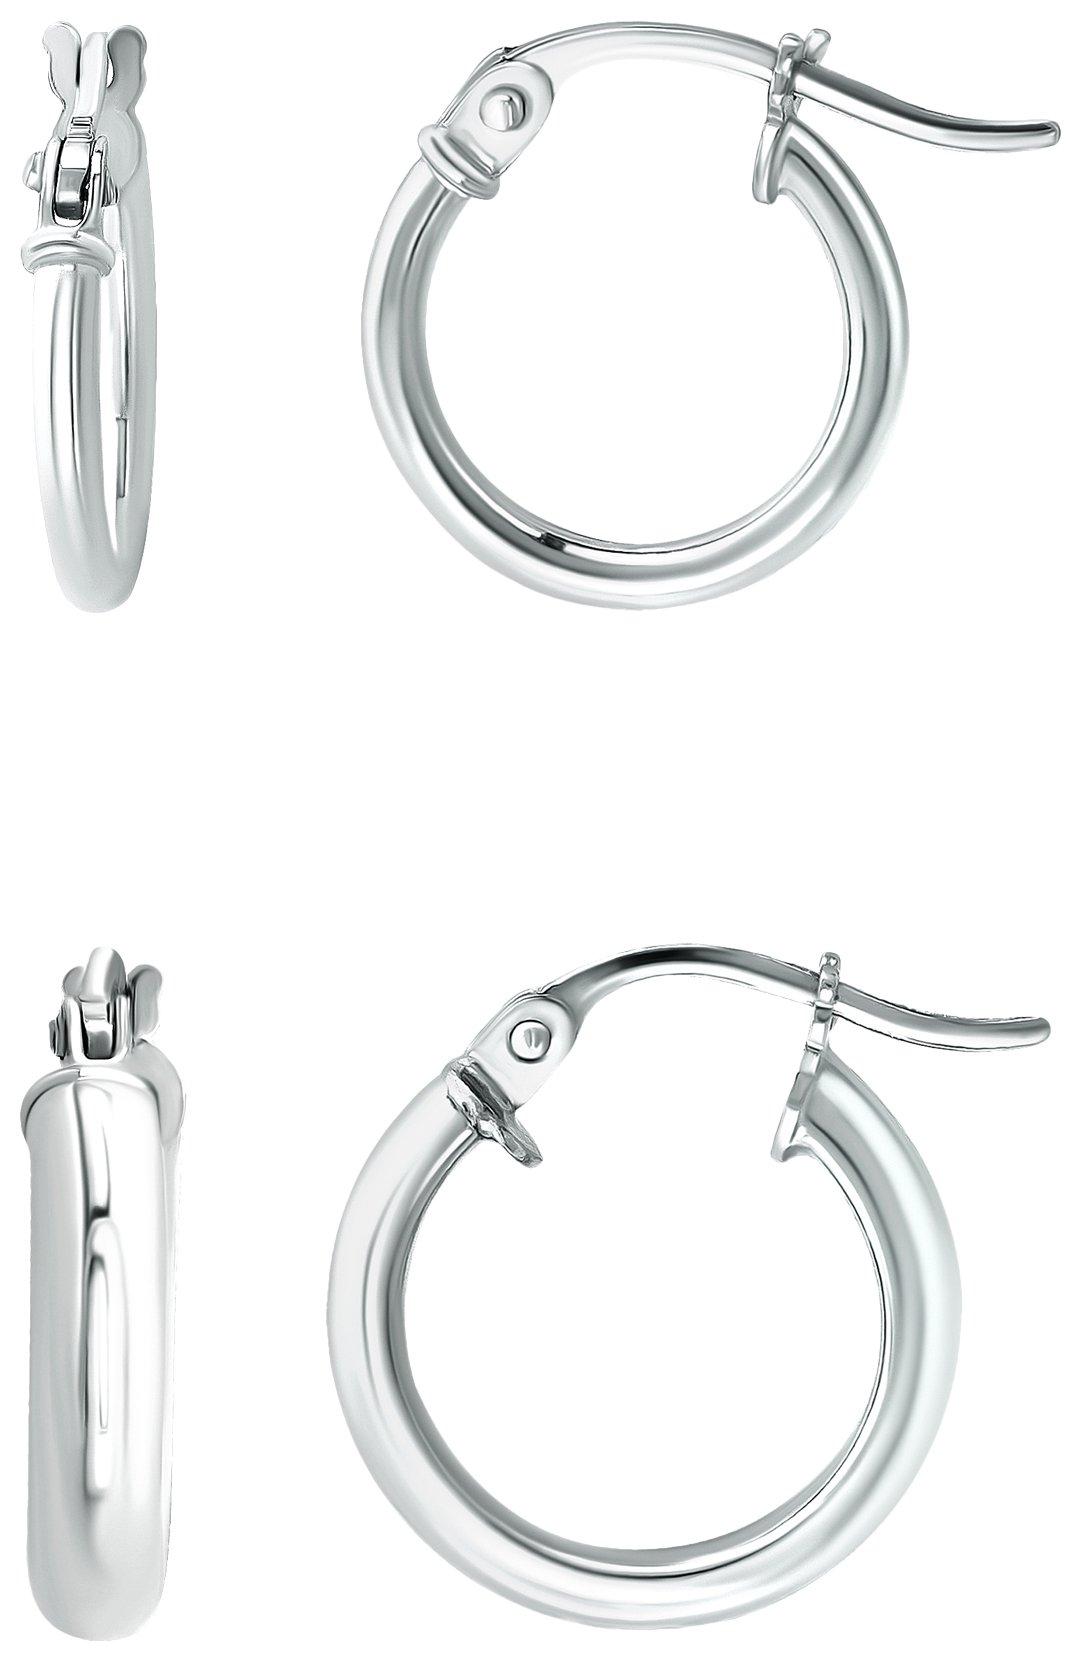 Piper & Taylor 2-Pc. Silver Tone Small Hoops Earring Set